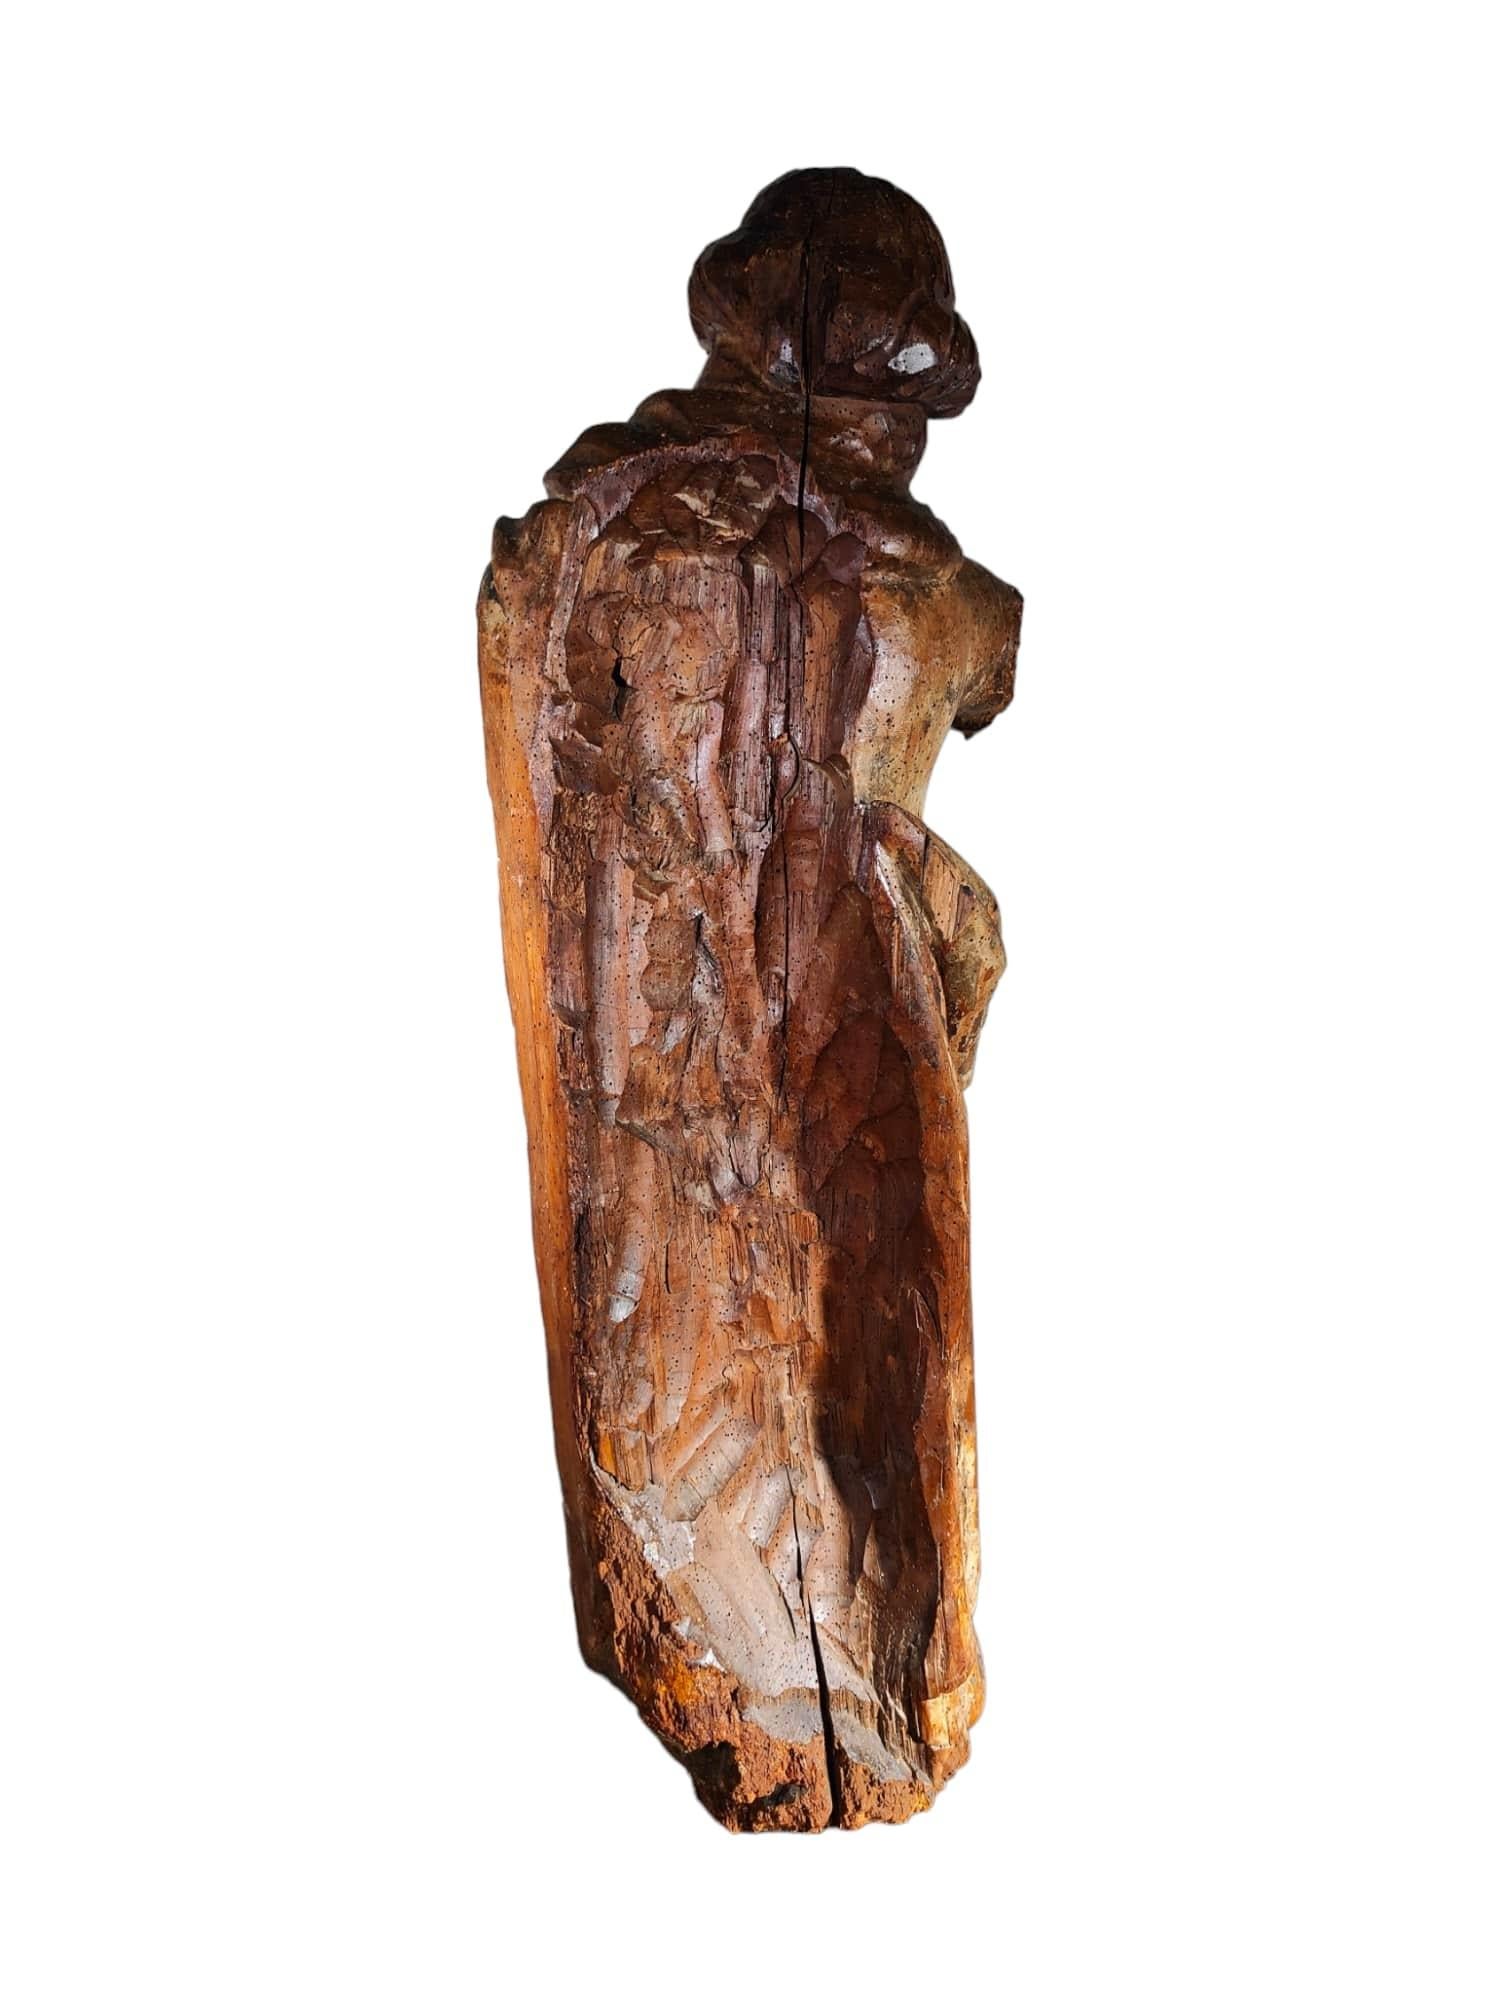 18th Century Wooden Sculpture of the Virgin Mary  For Sale 2